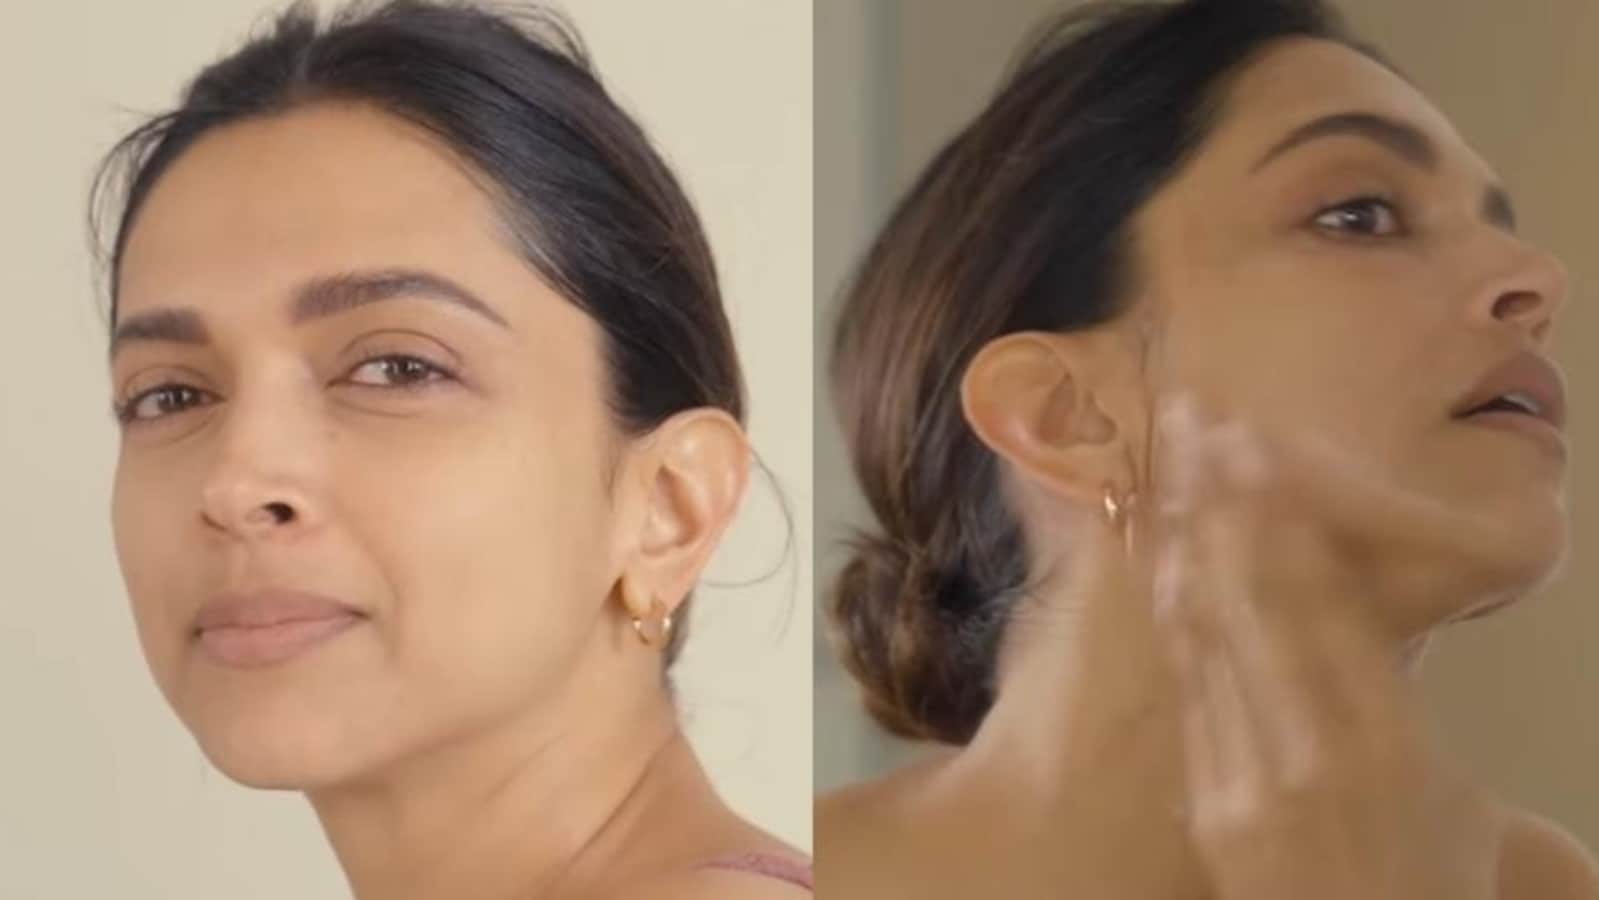 Deepika Padukone shows skincare routine in video, fans call her flawless. Watch | Bollywood